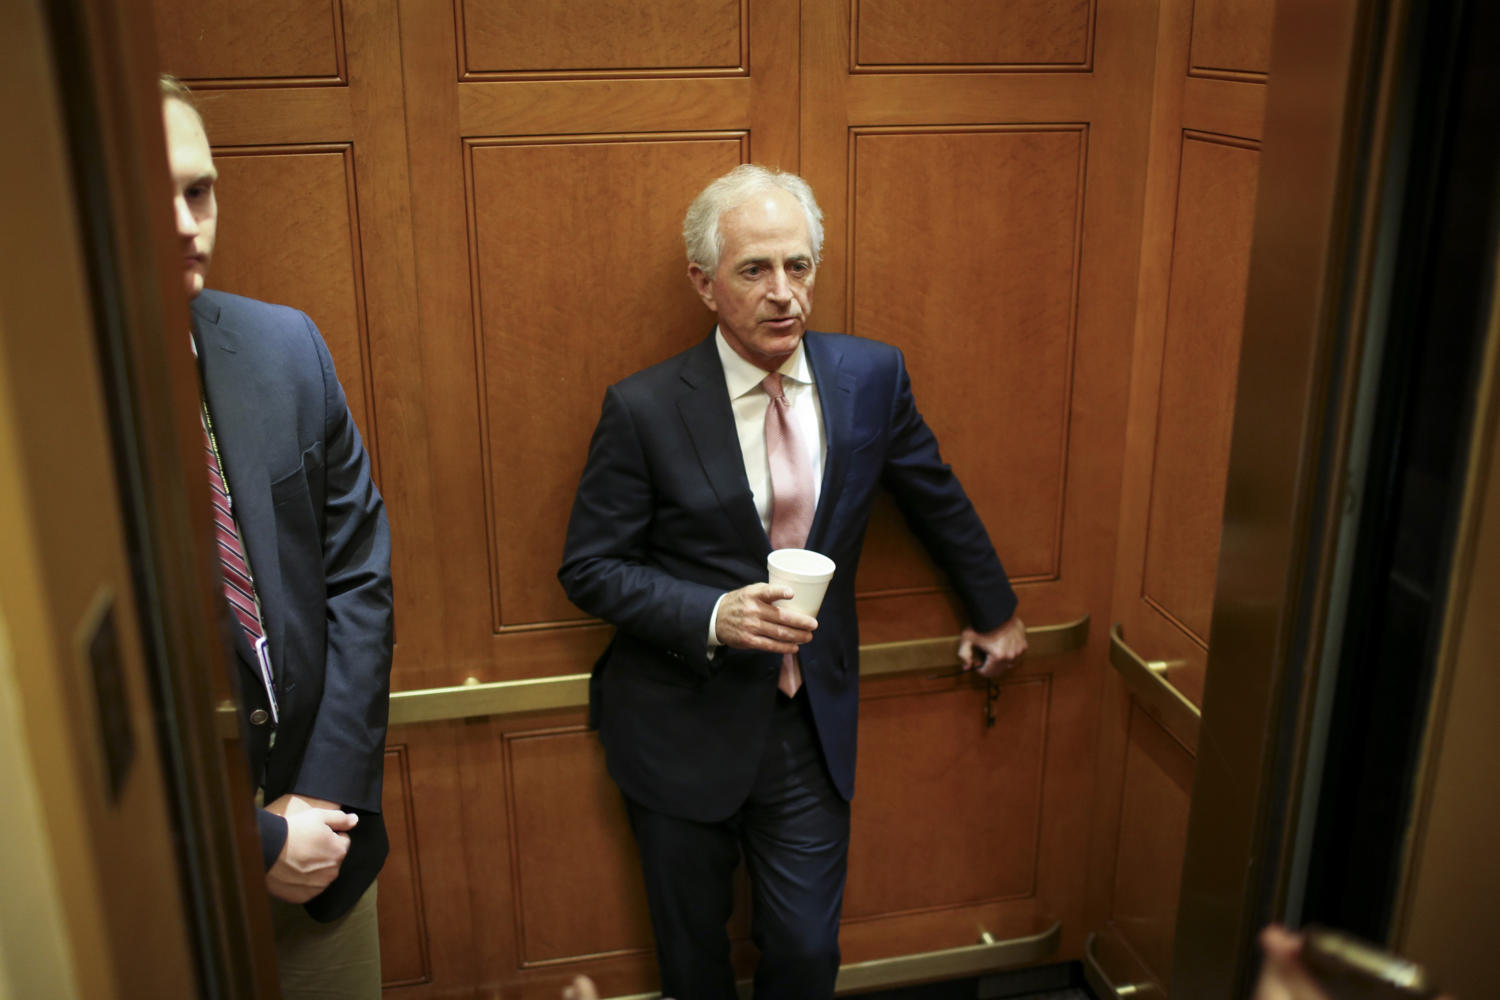 Sen. Bob Corker (R-Tenn.) arrives to the U.S. Capitol Building to vote on the health care bill on July 26, 2017 in Washington, D.C. (Oliver Contreras/Sipa USA/TNS)